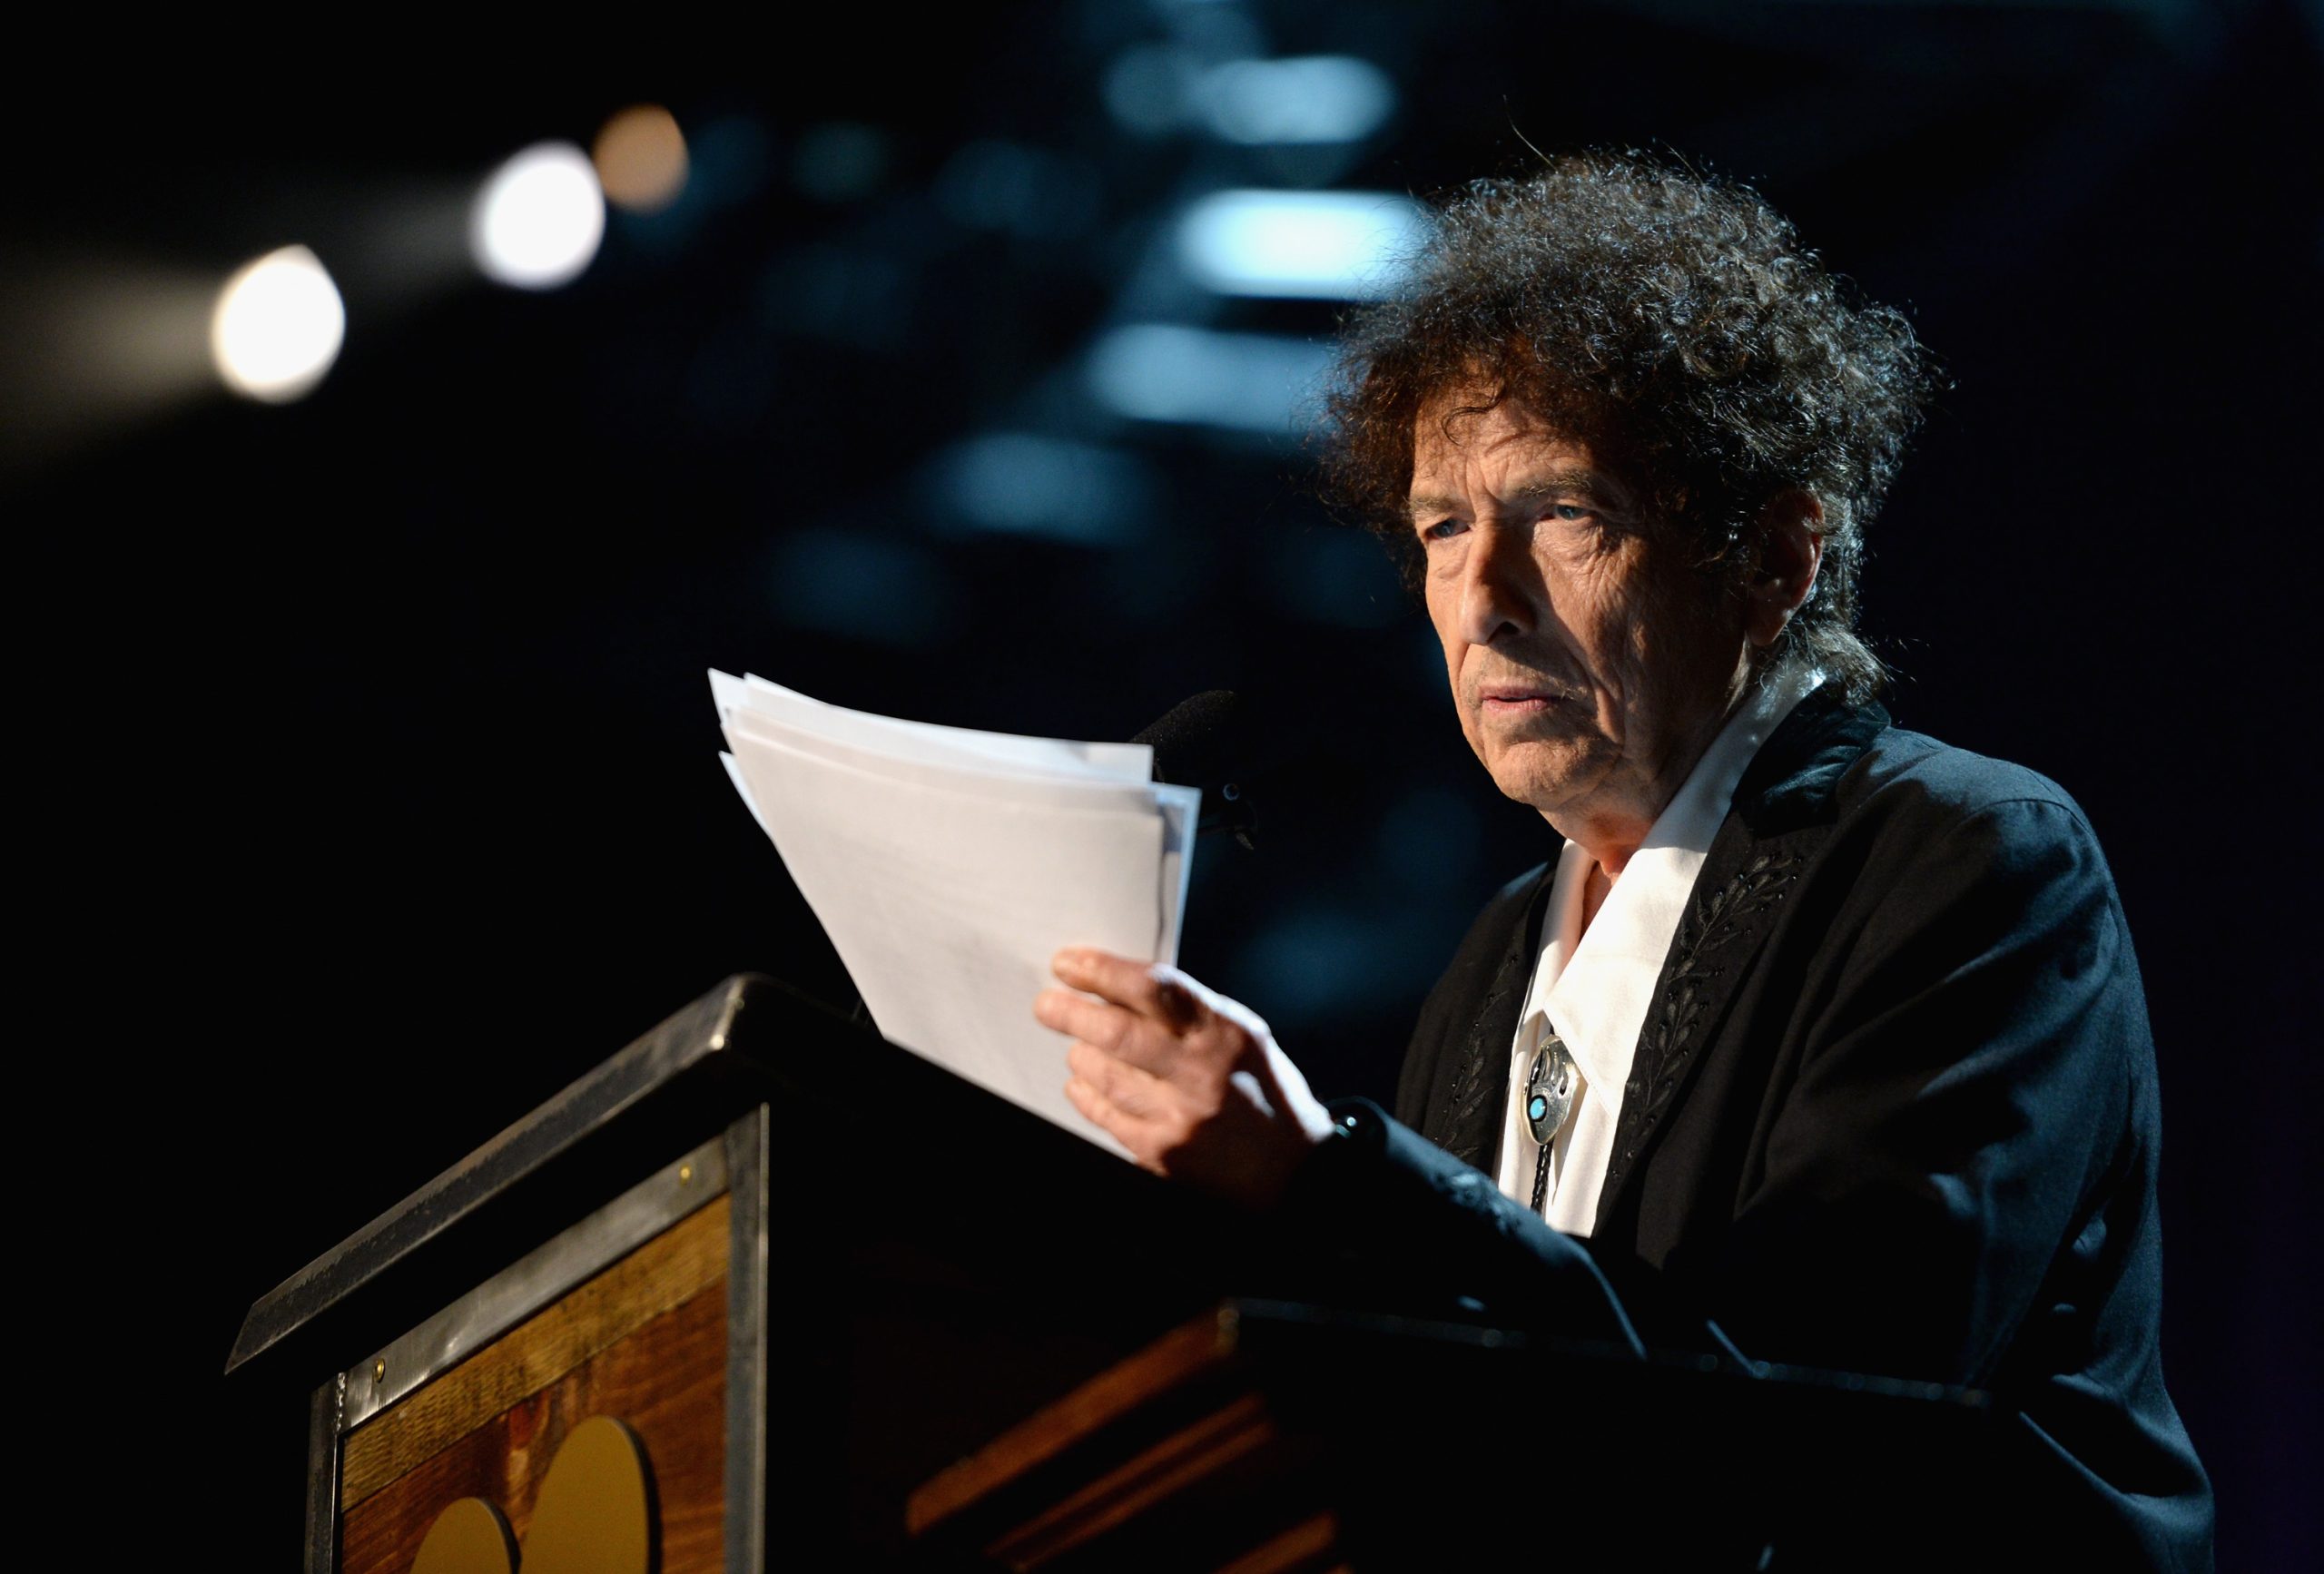 Bob Dylan at the 2015 MusiCares ceremony